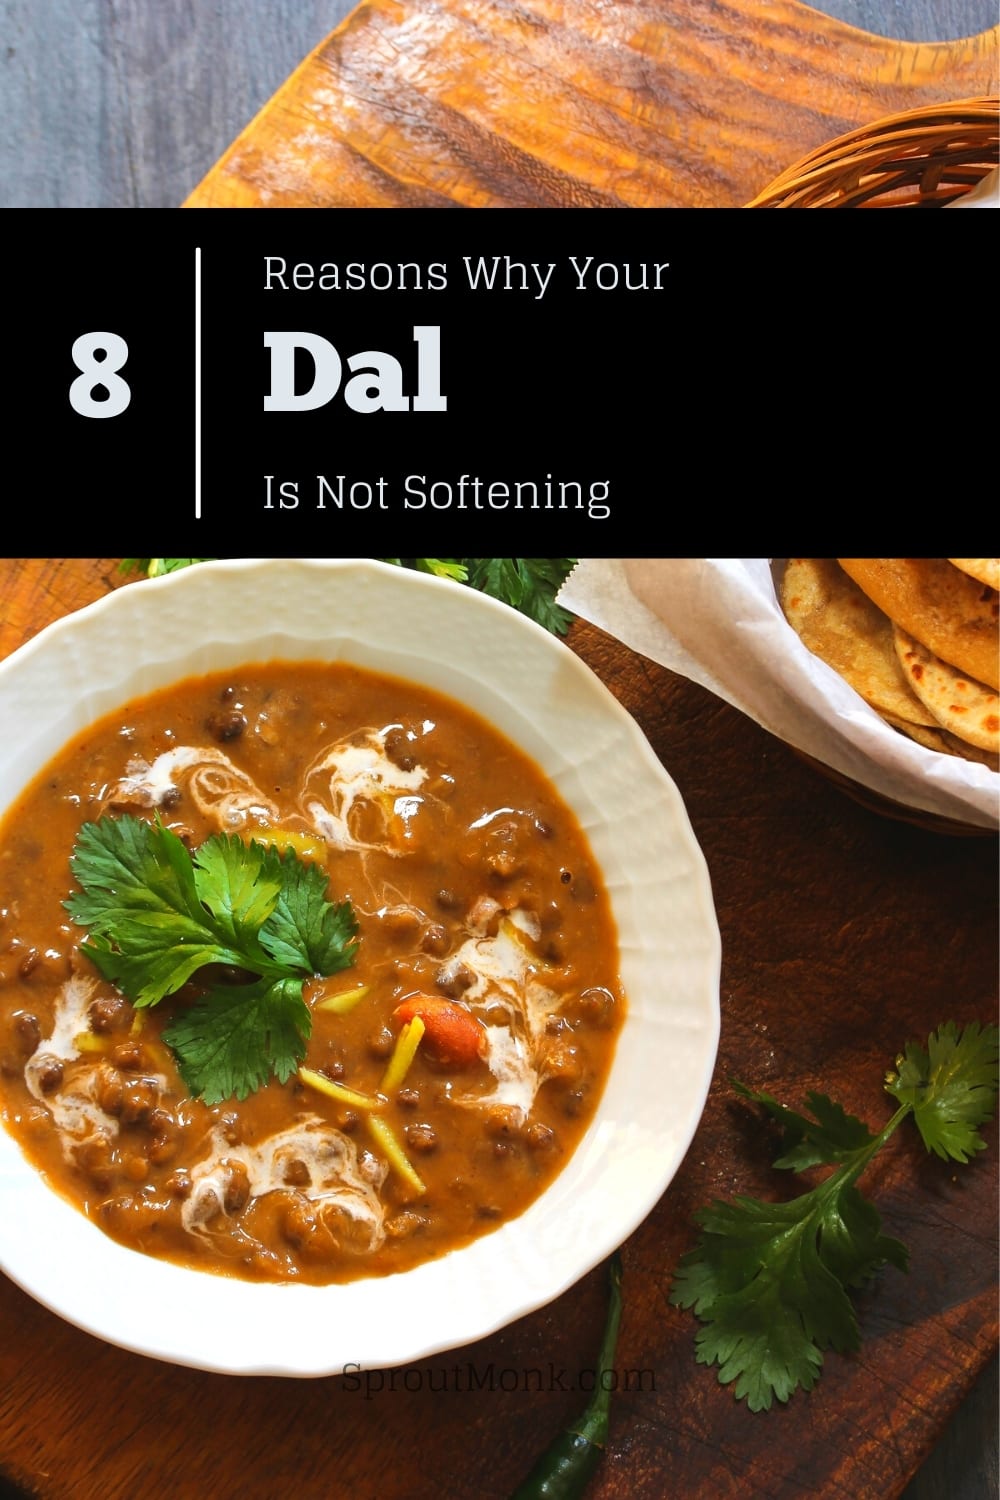 dal not softening guide cover image